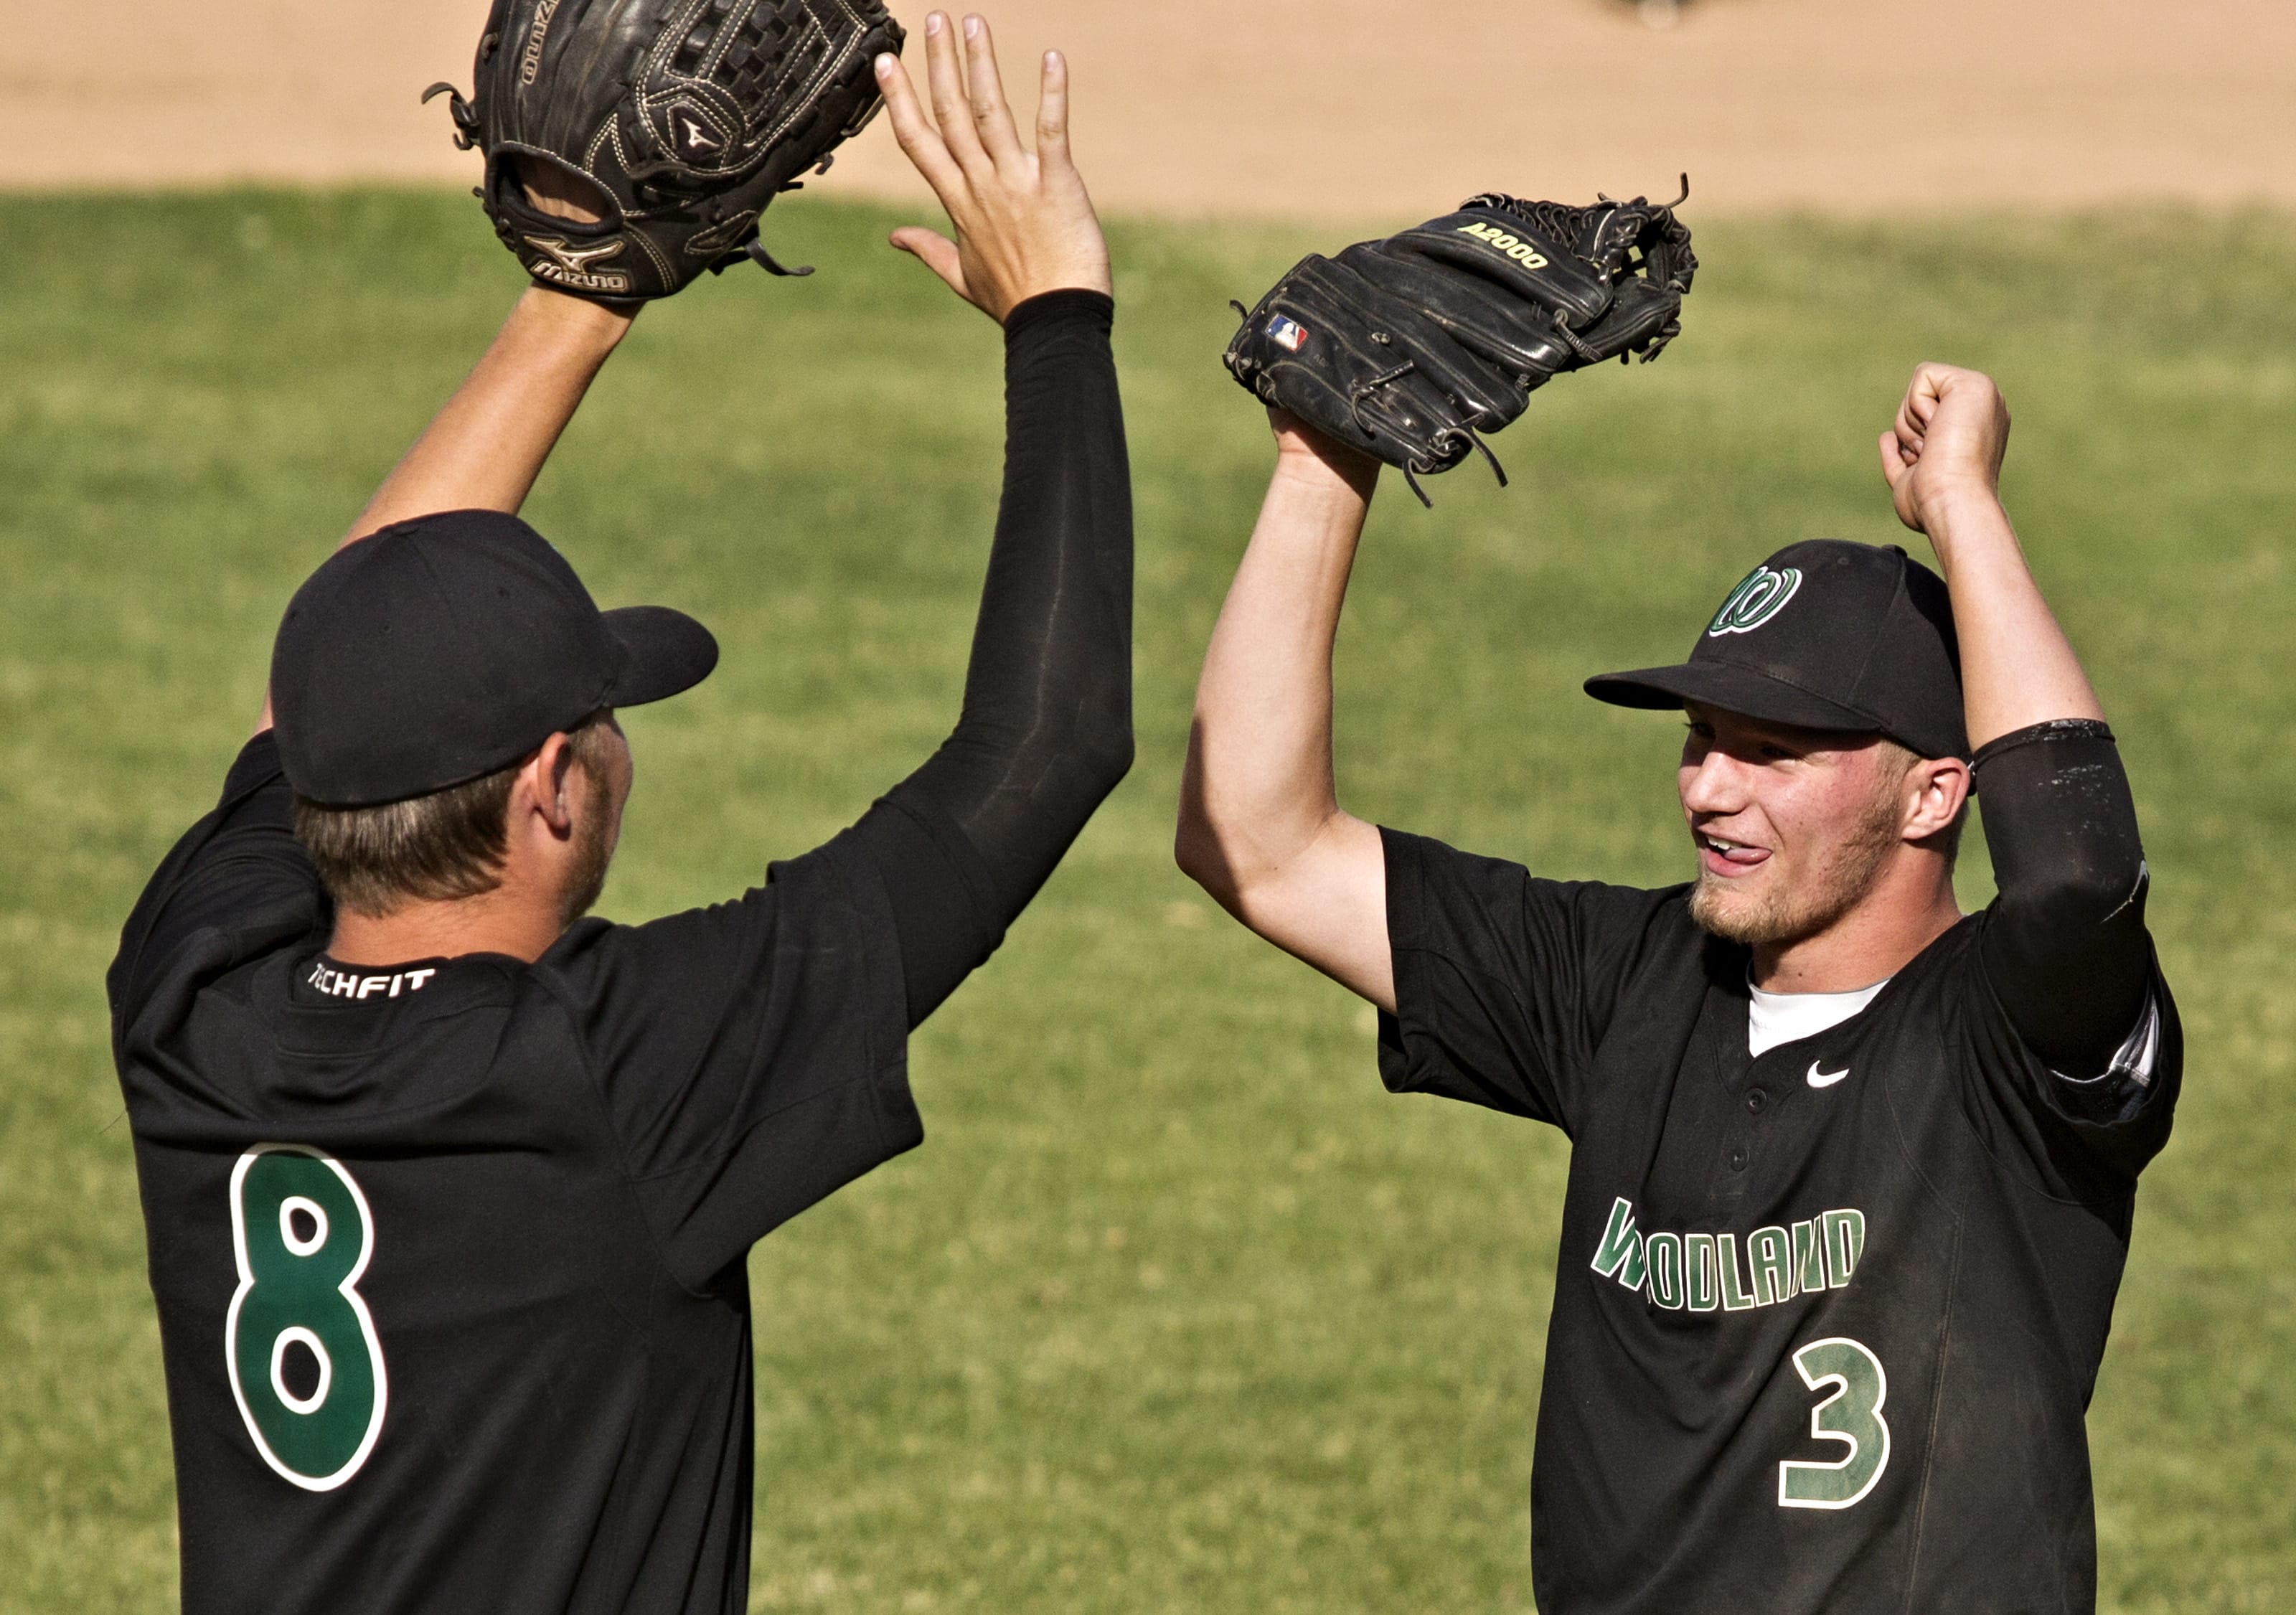 Woodland's Colton Lucas, left, and Trevor Huddleston celebrate after the Beavers' 4-0 victory against Kiona Benton during the Class 1A state baseball semifinals at Yakima County Stadium on Friday, May 30, 2014.